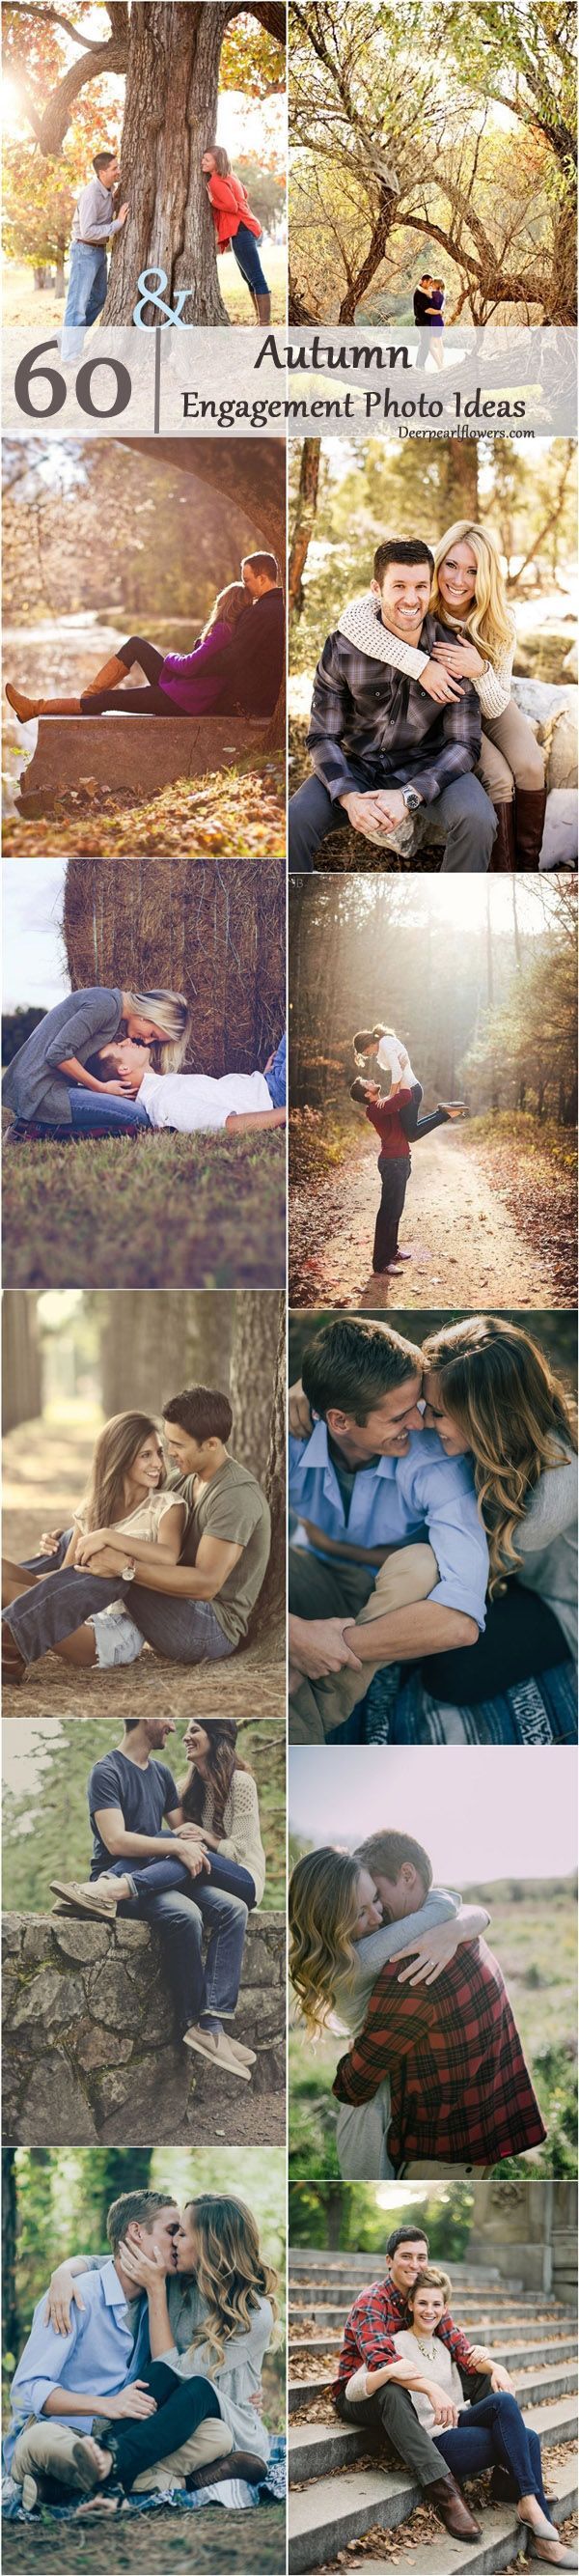 Fall Engagement Photo Shoot and Poses Ideas / www.deerpearlflow…